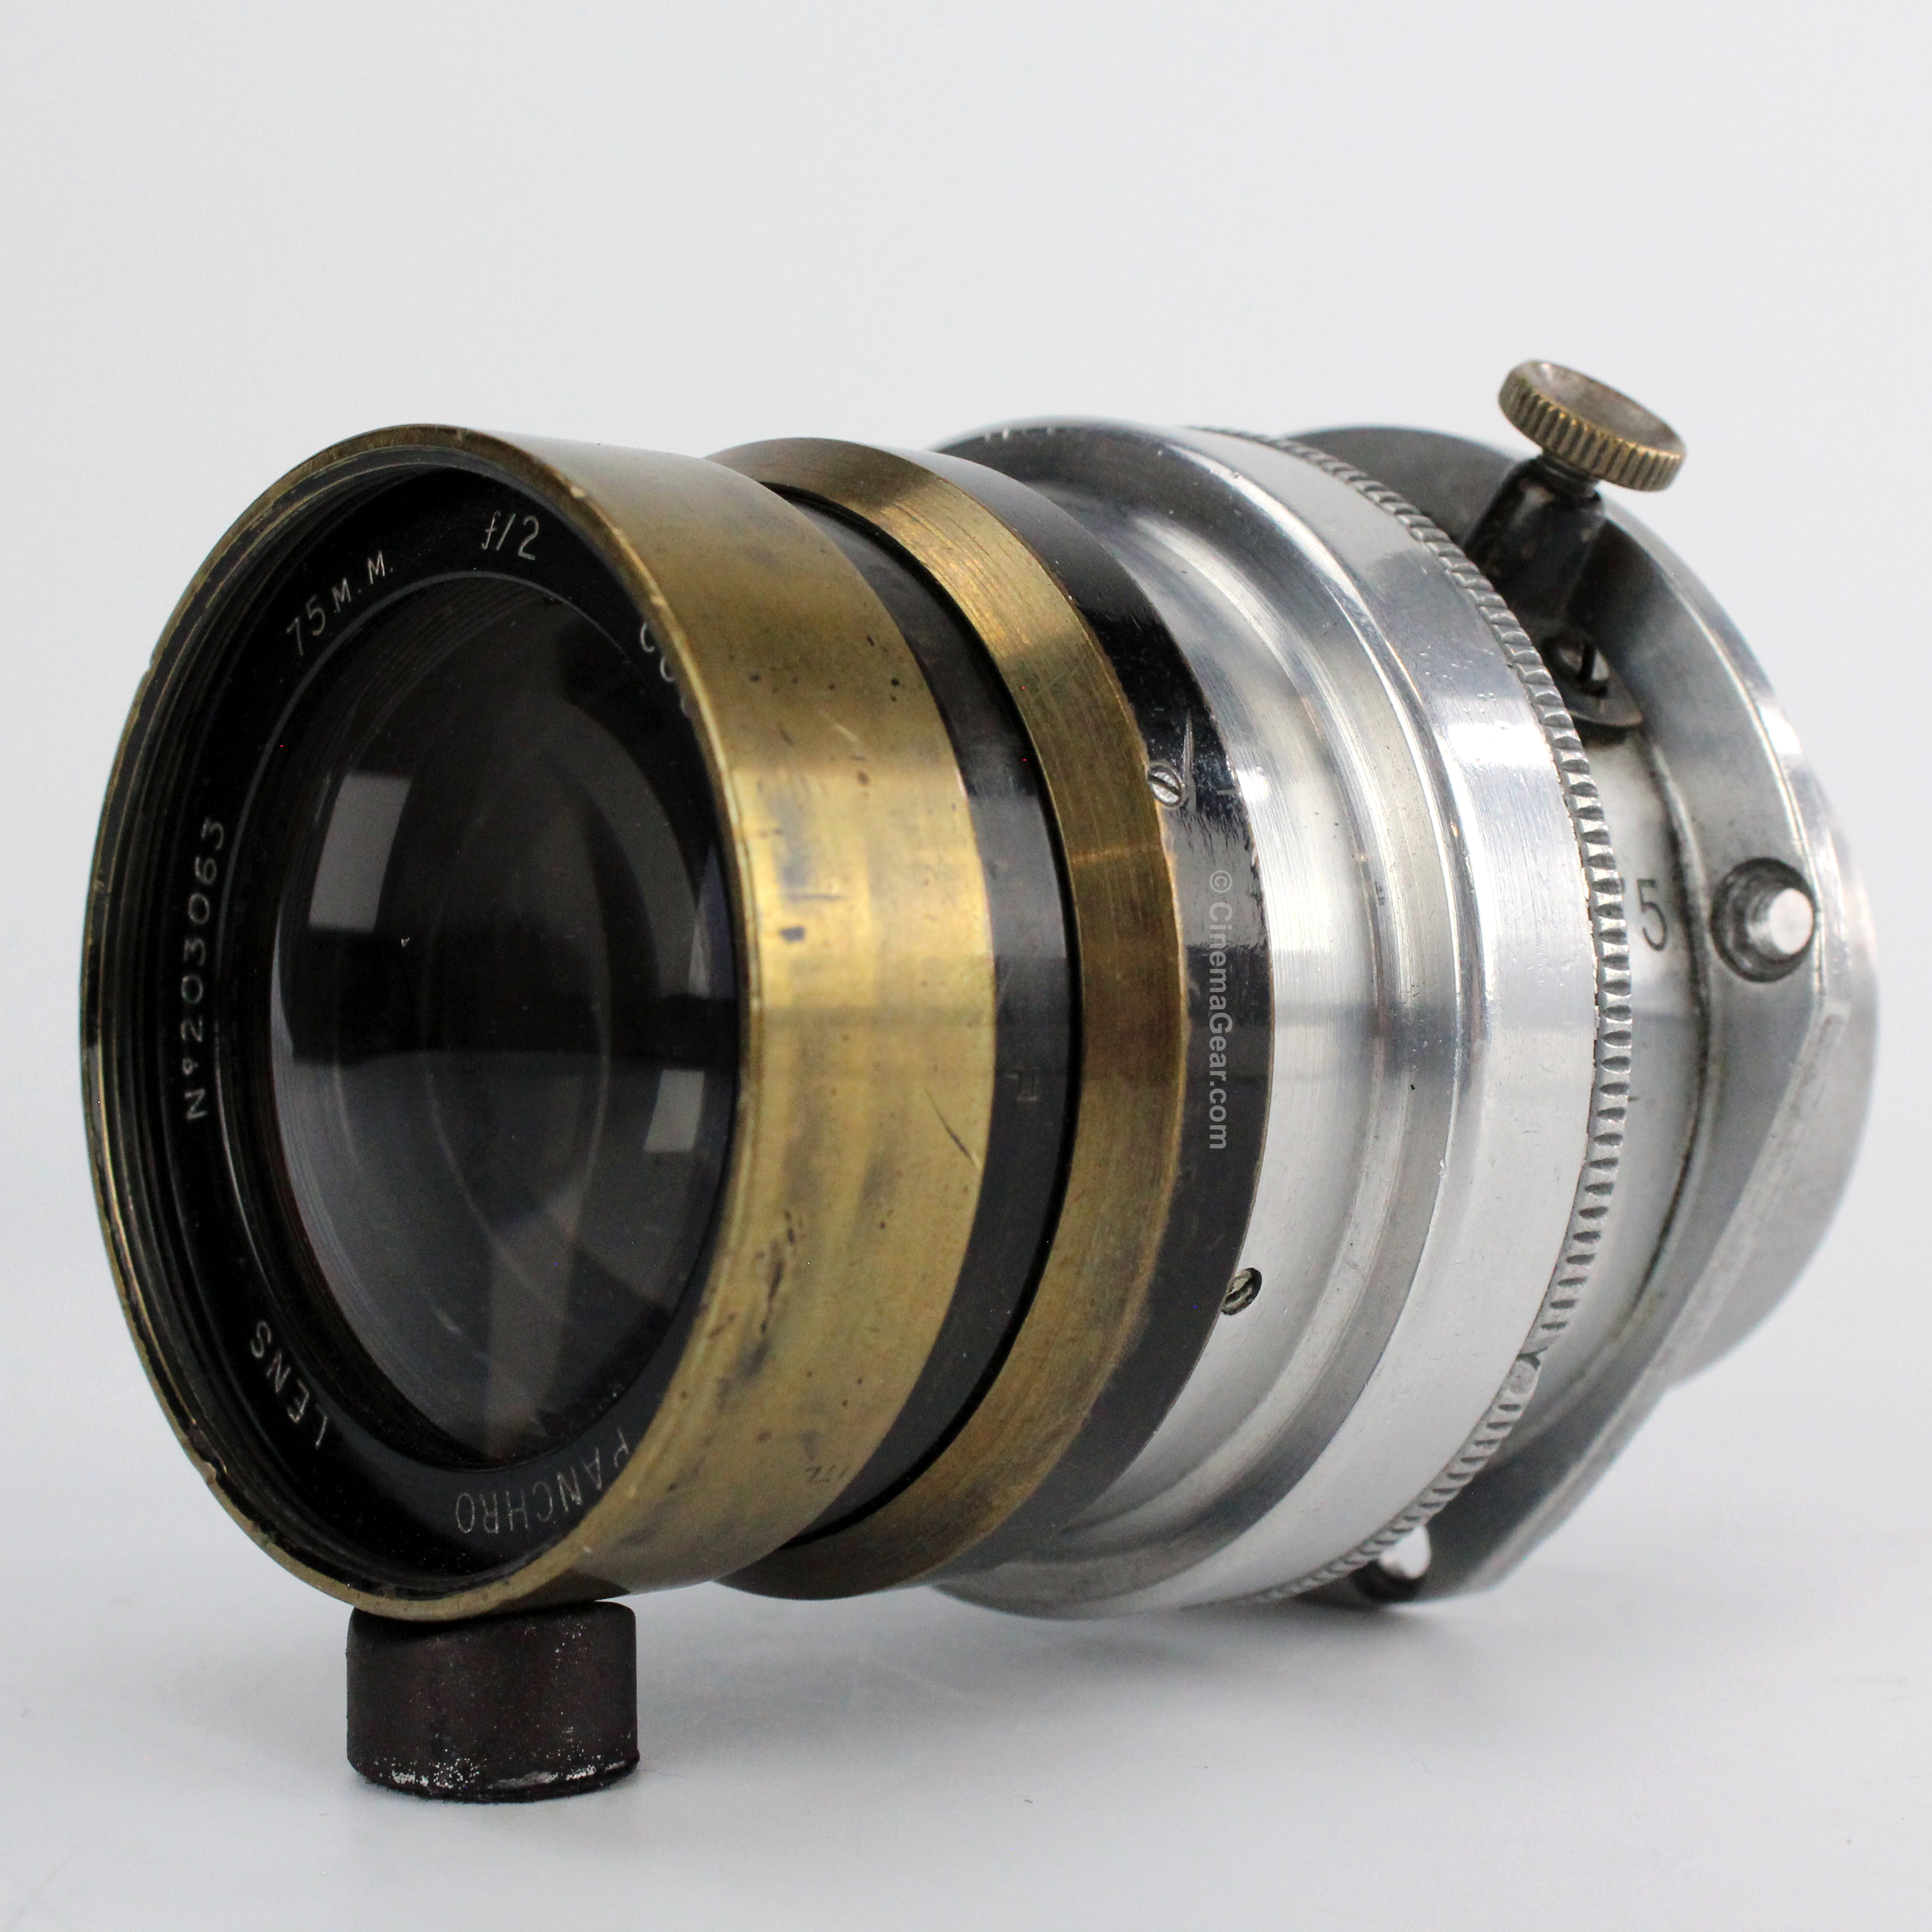 Cooke Speed Panchro 75mm f2 lens in Mitchell Standard mount.